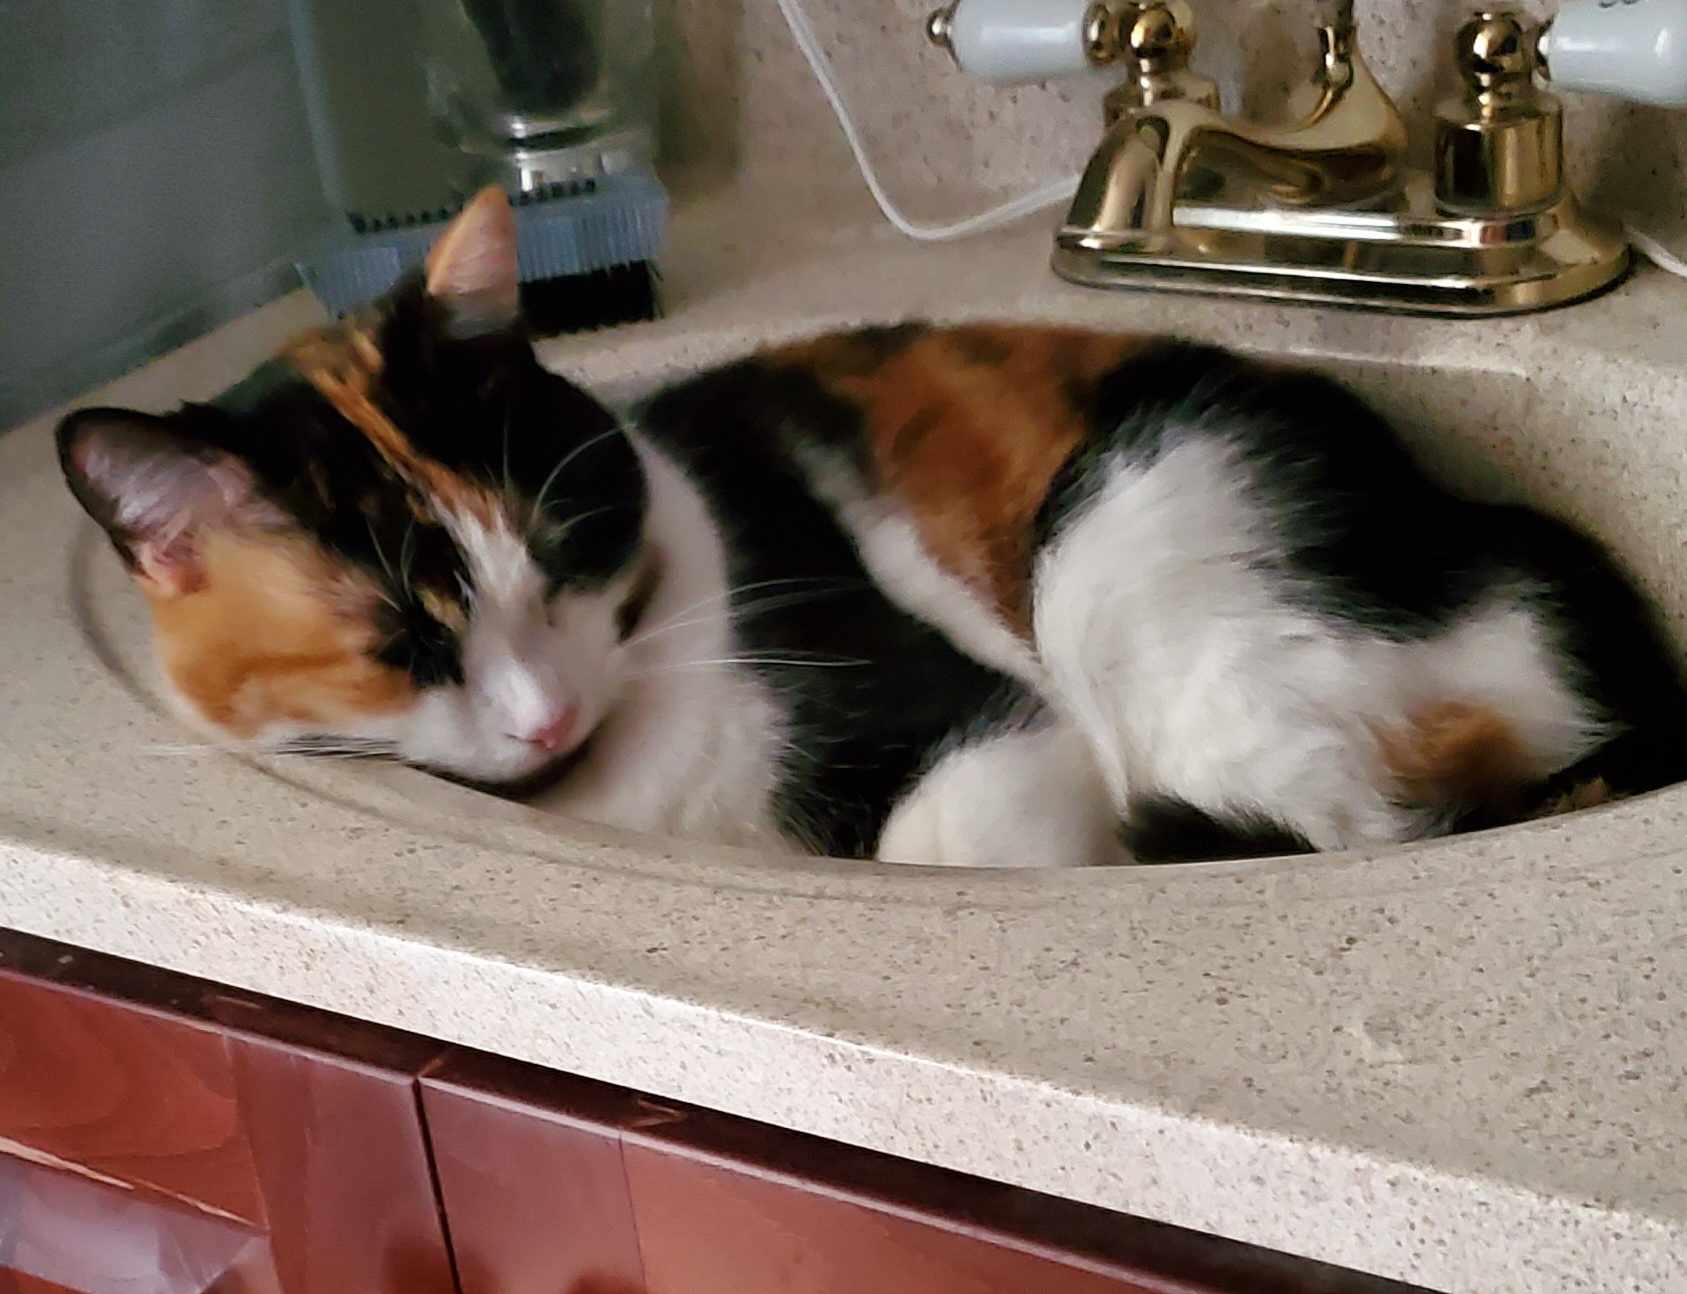 A photo of a calico cat sleeping in a bathroom sink